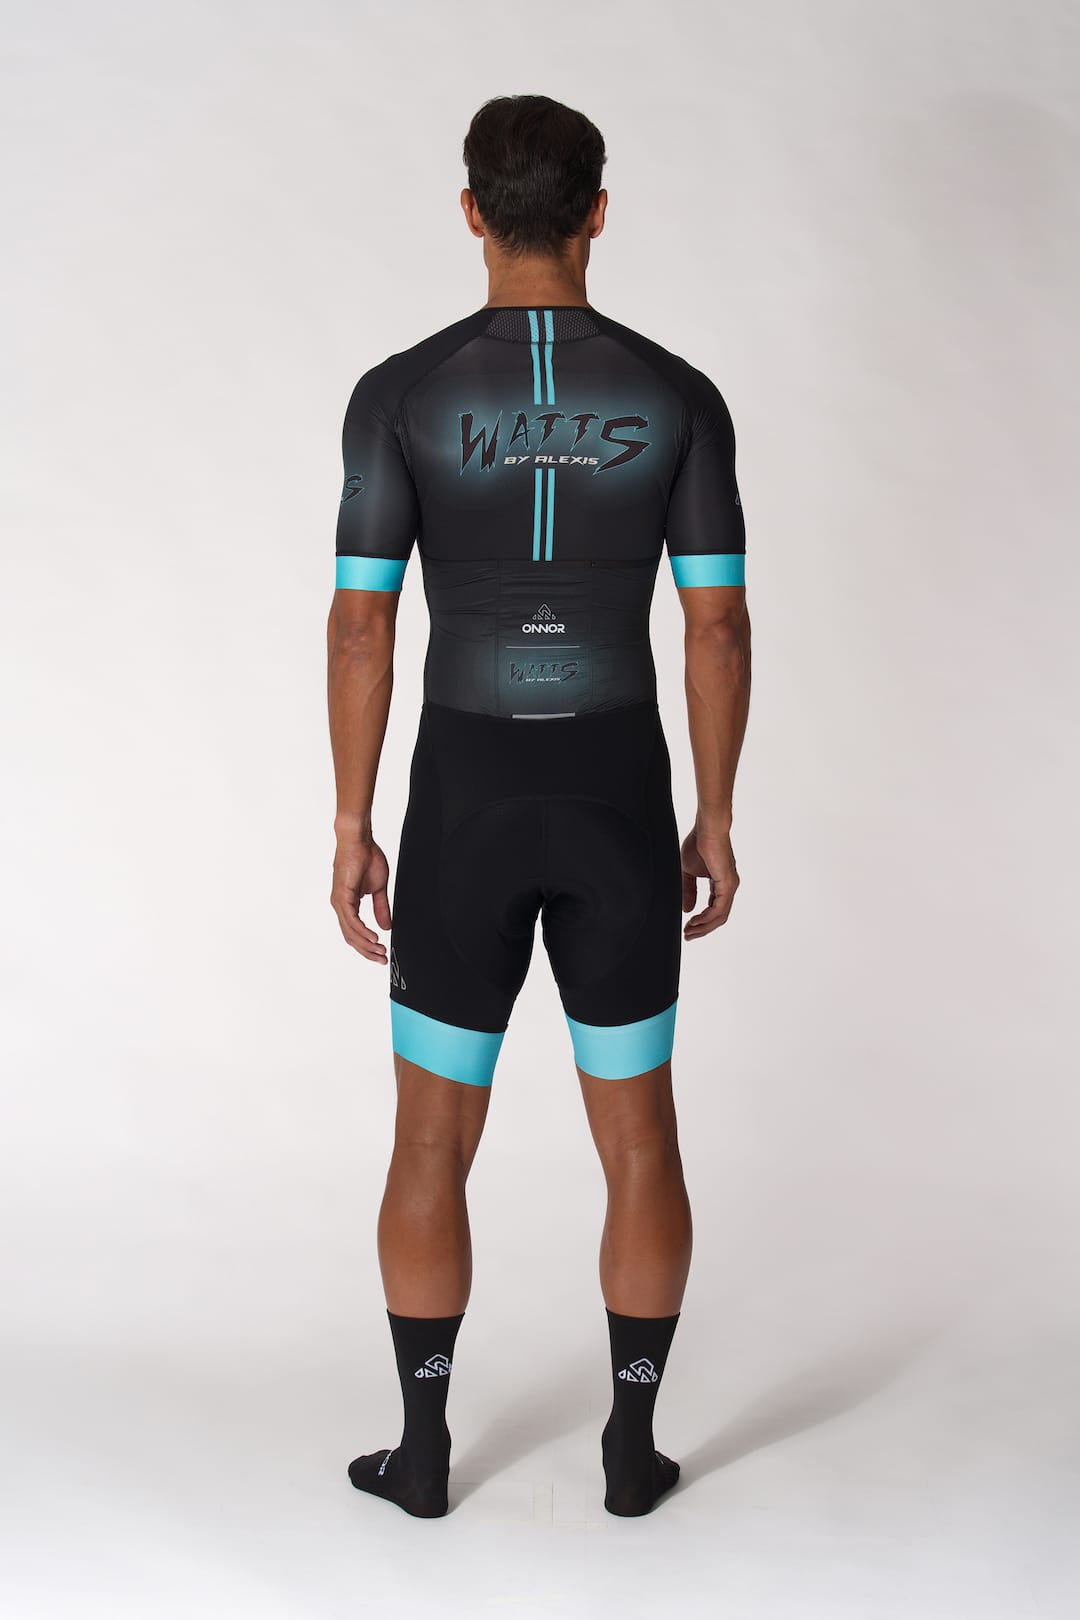 Customizable Cycling Outfits with No Minimum Order Requirement